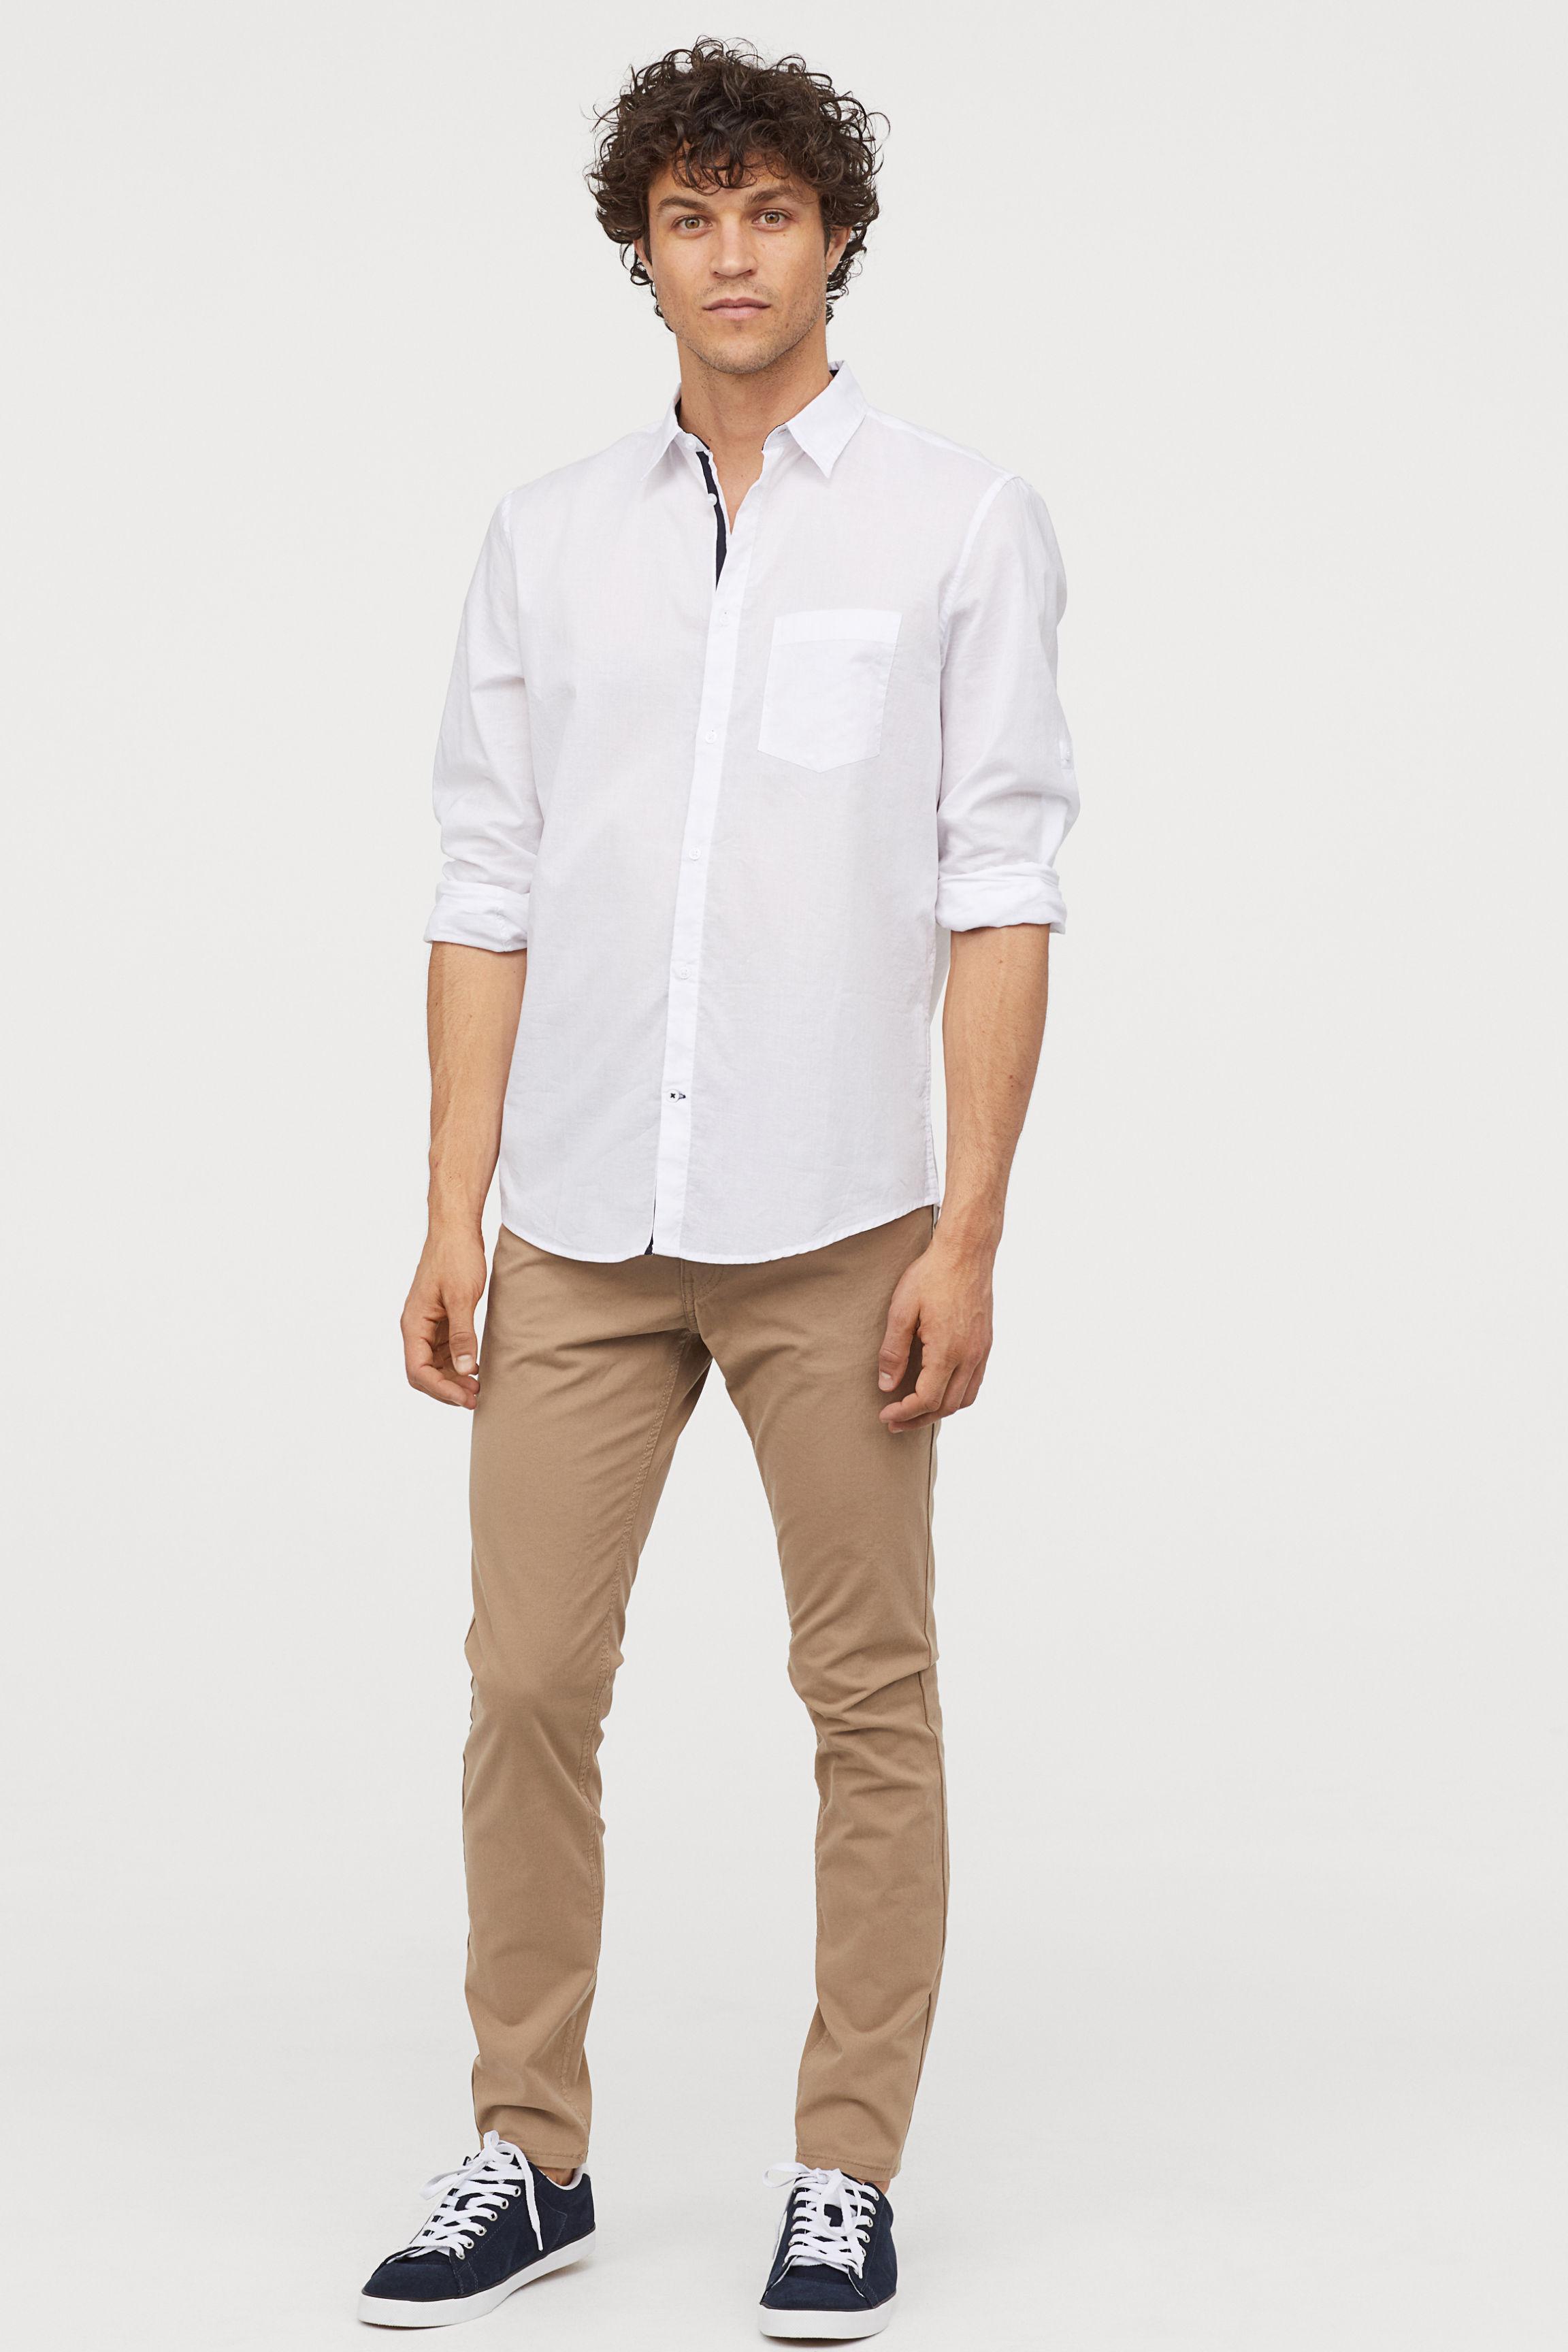 H&M Skinny Fit Twill Pants in Natural for Men - Lyst